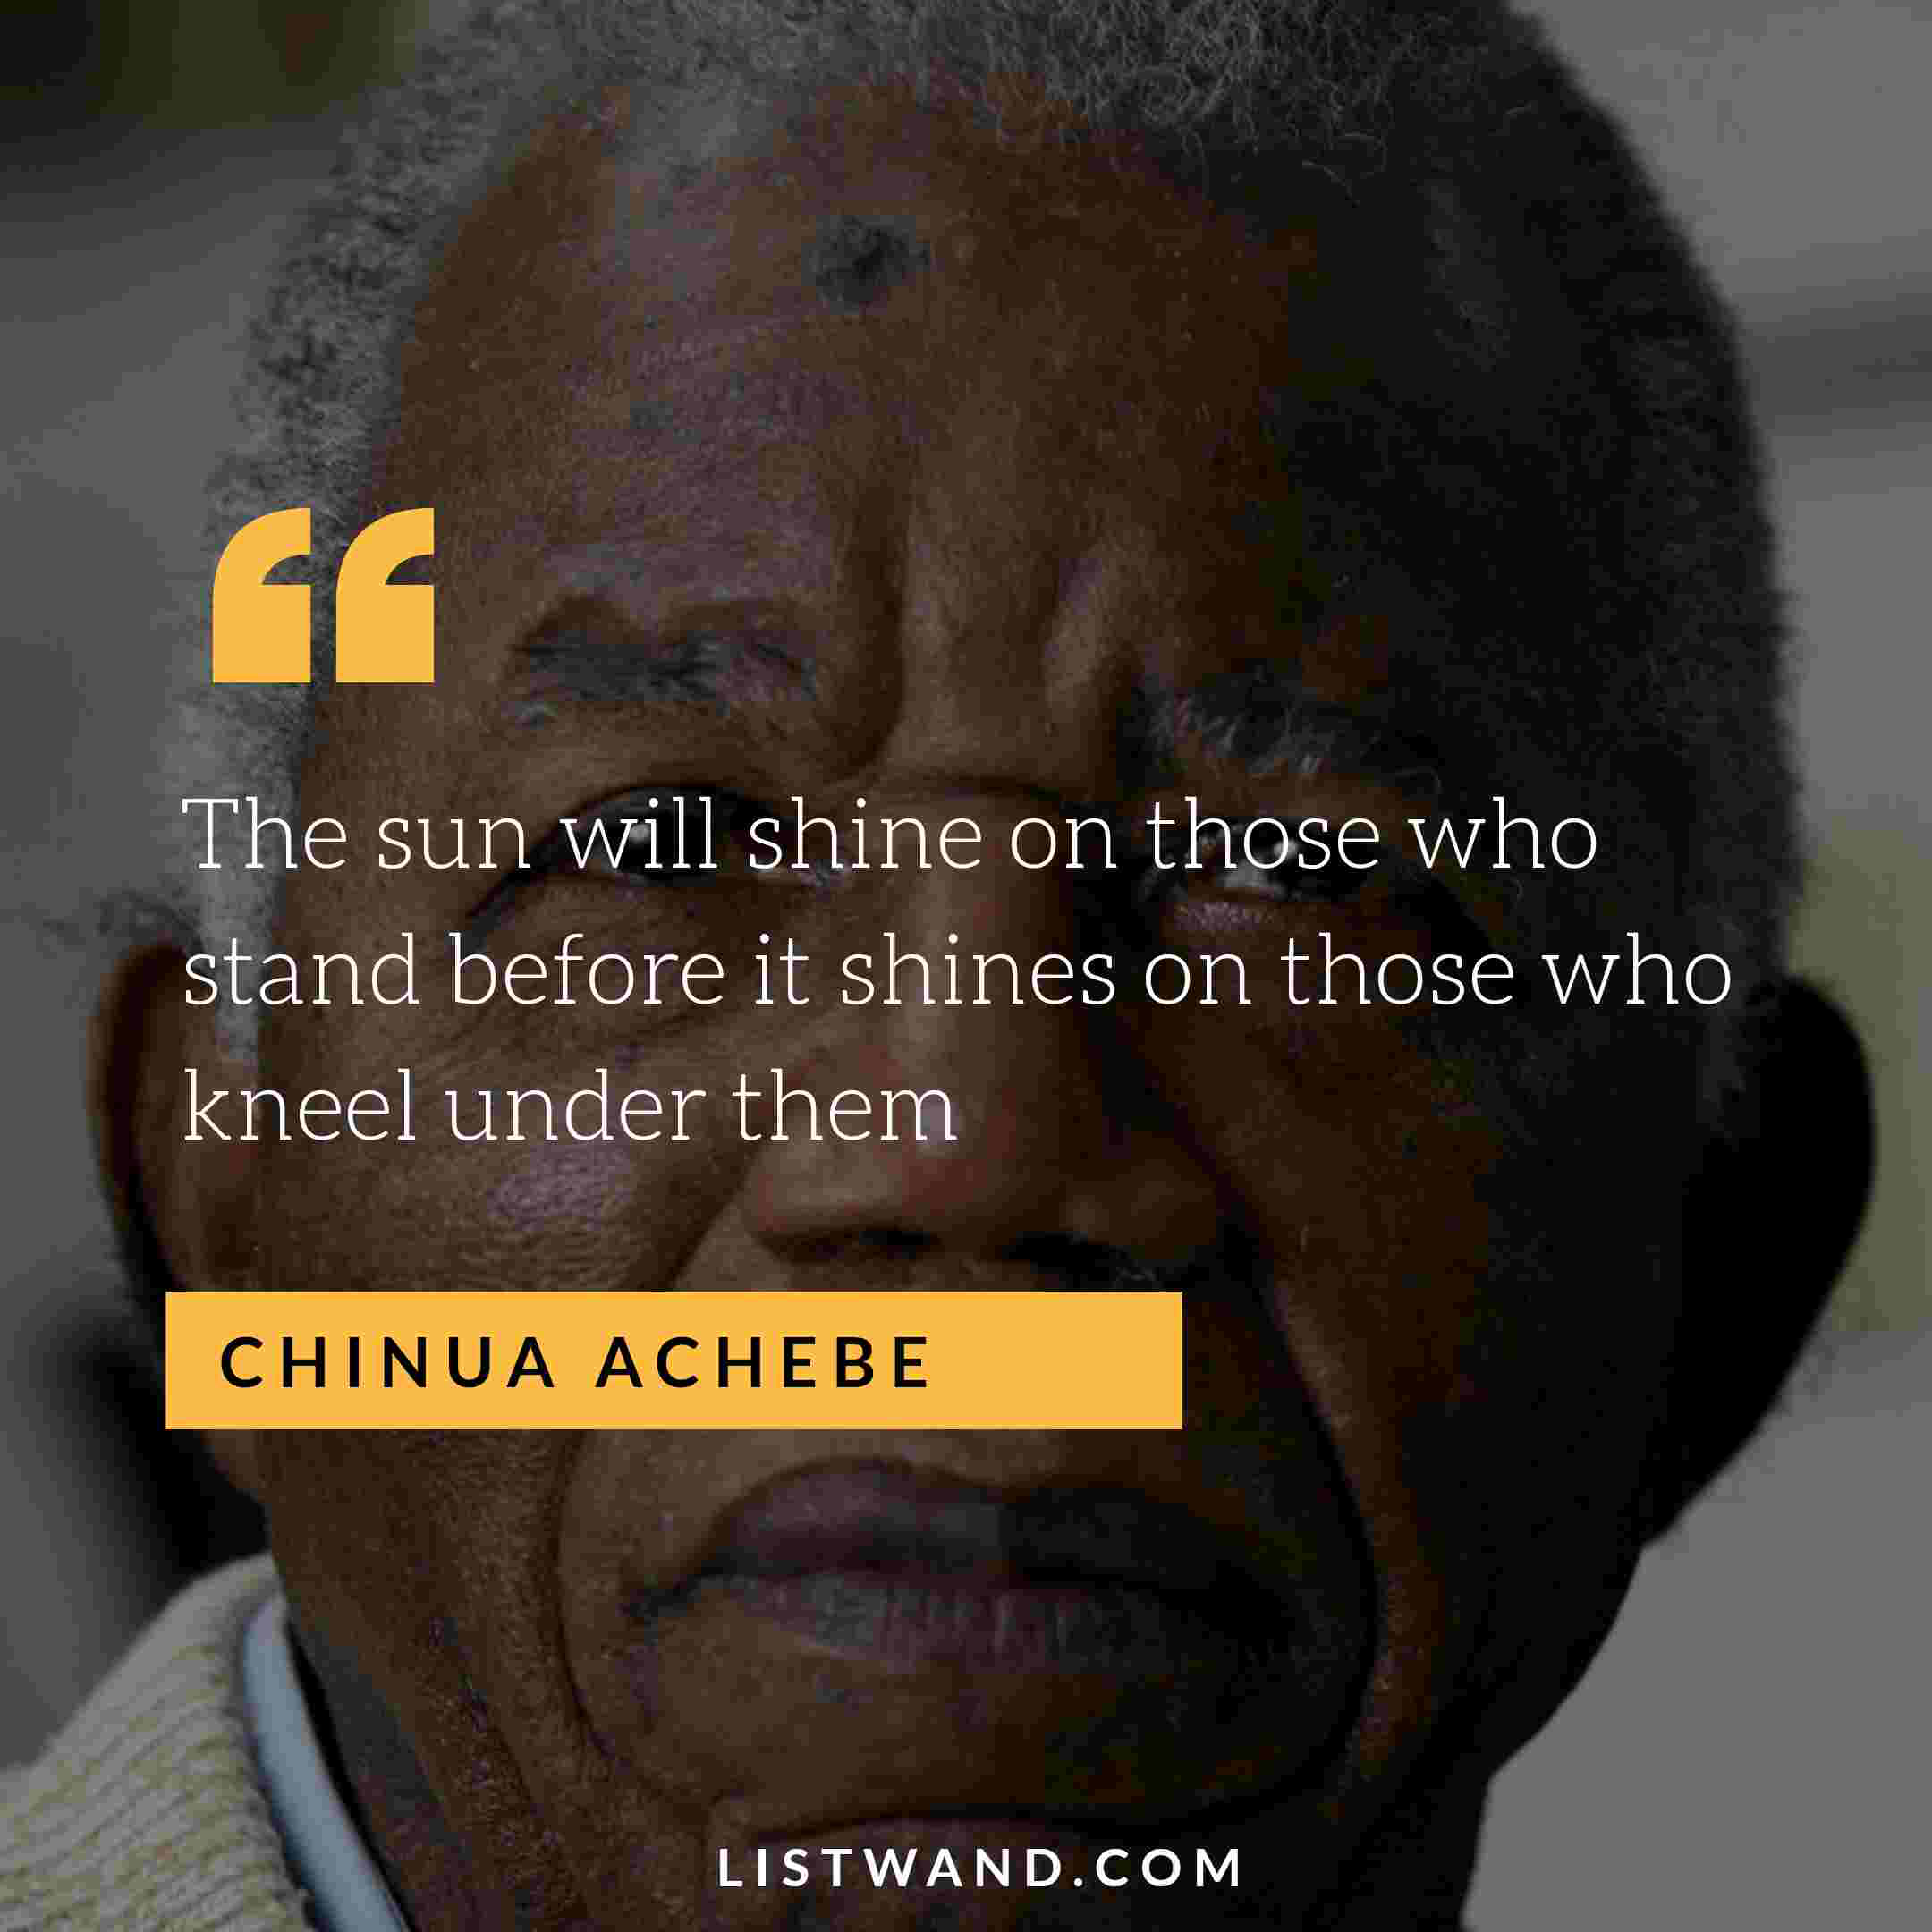 13 Quotes to Remember Chinua Achebe on his 90th Posthumous Birthday